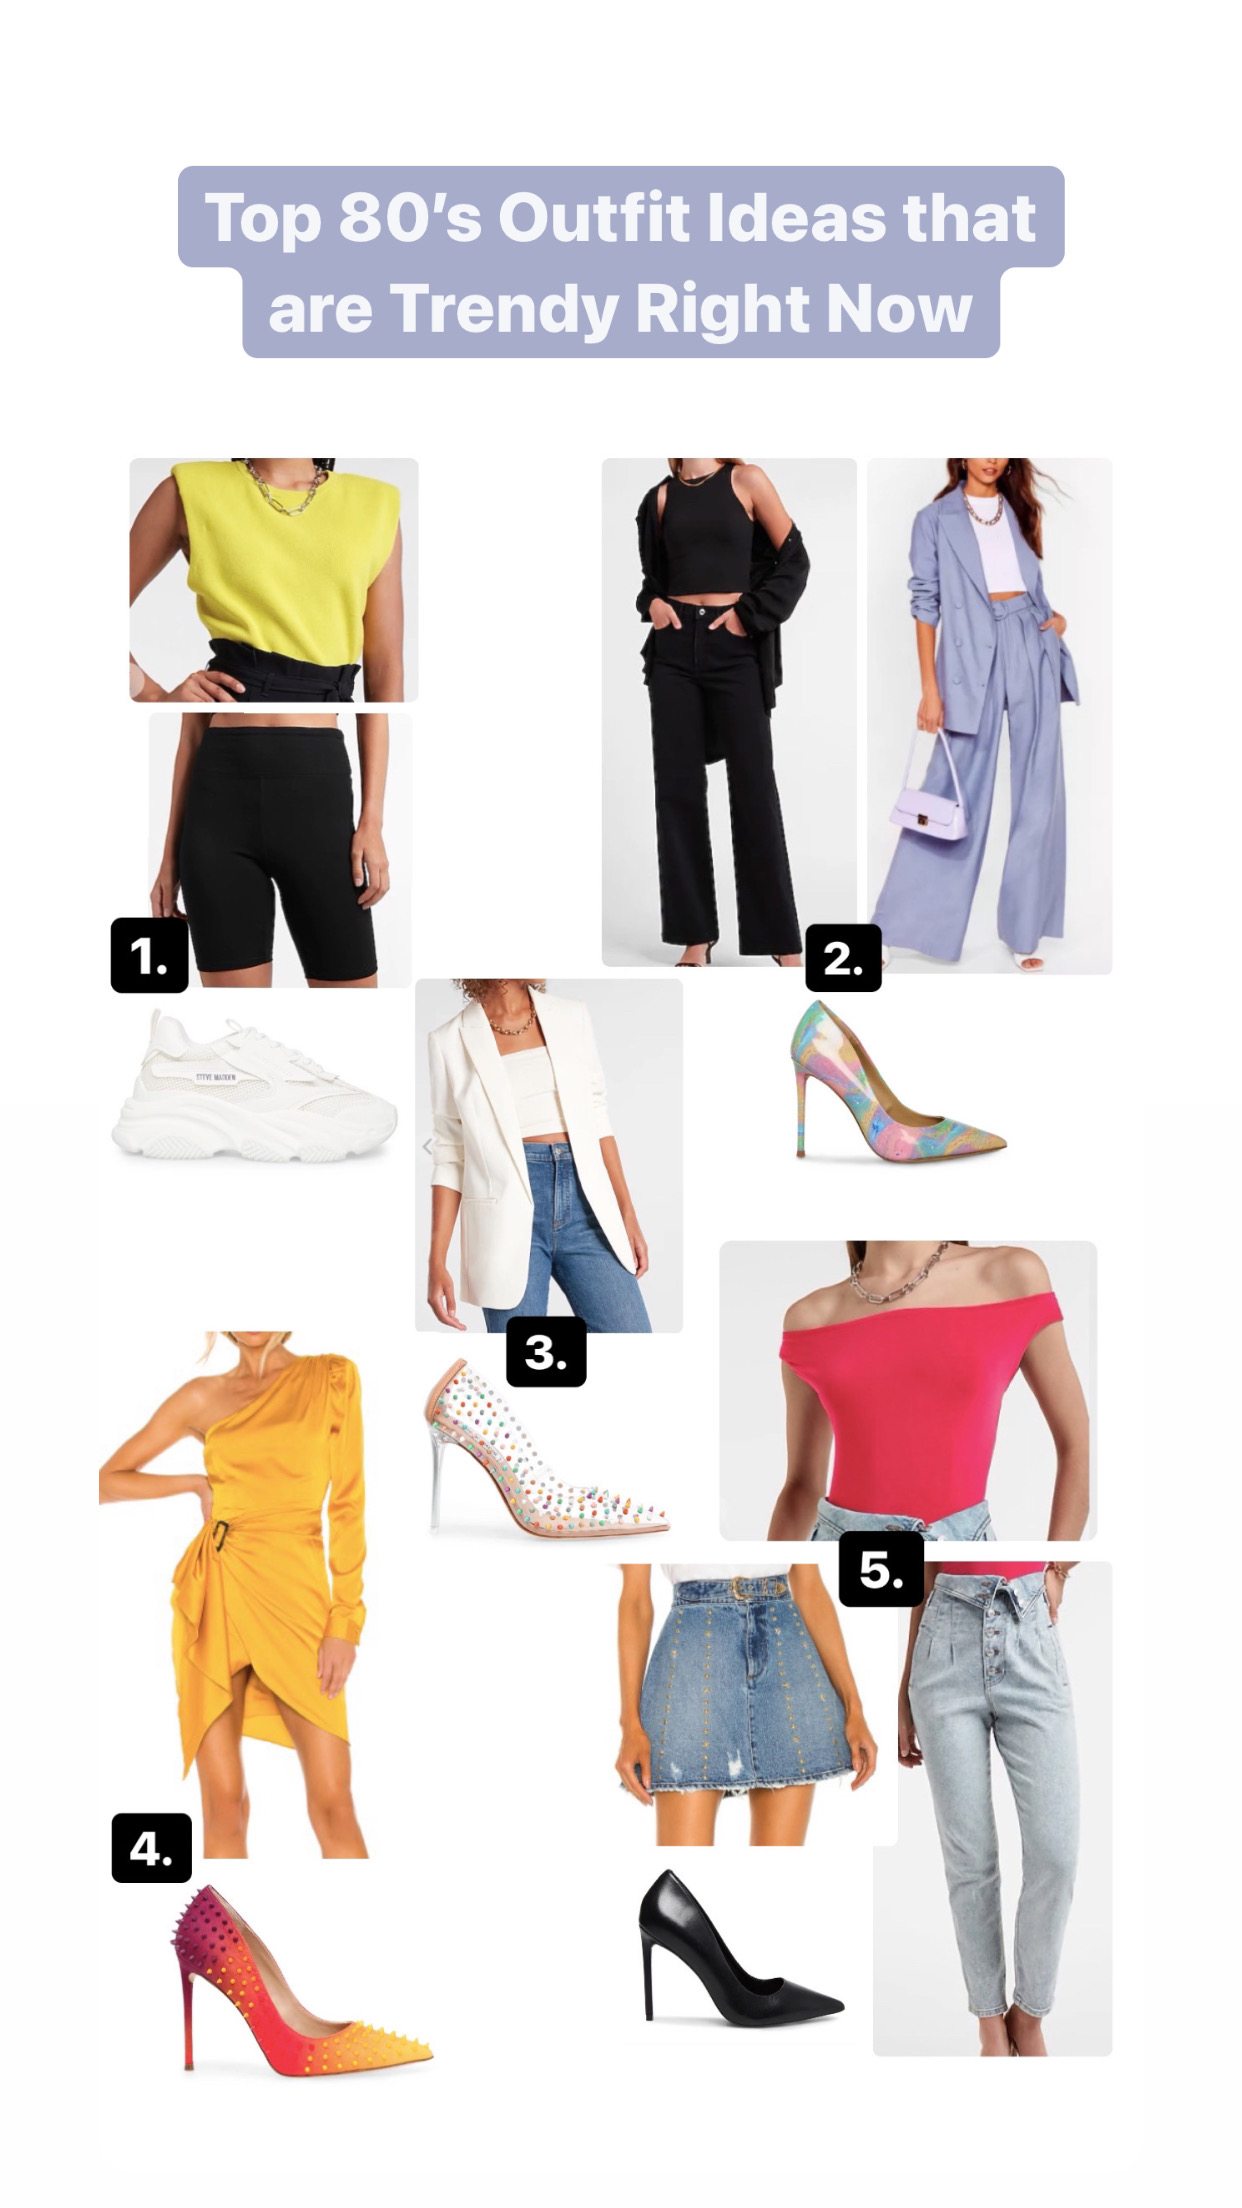 Top 80s Outfit Ideas that are Trendy Right Now